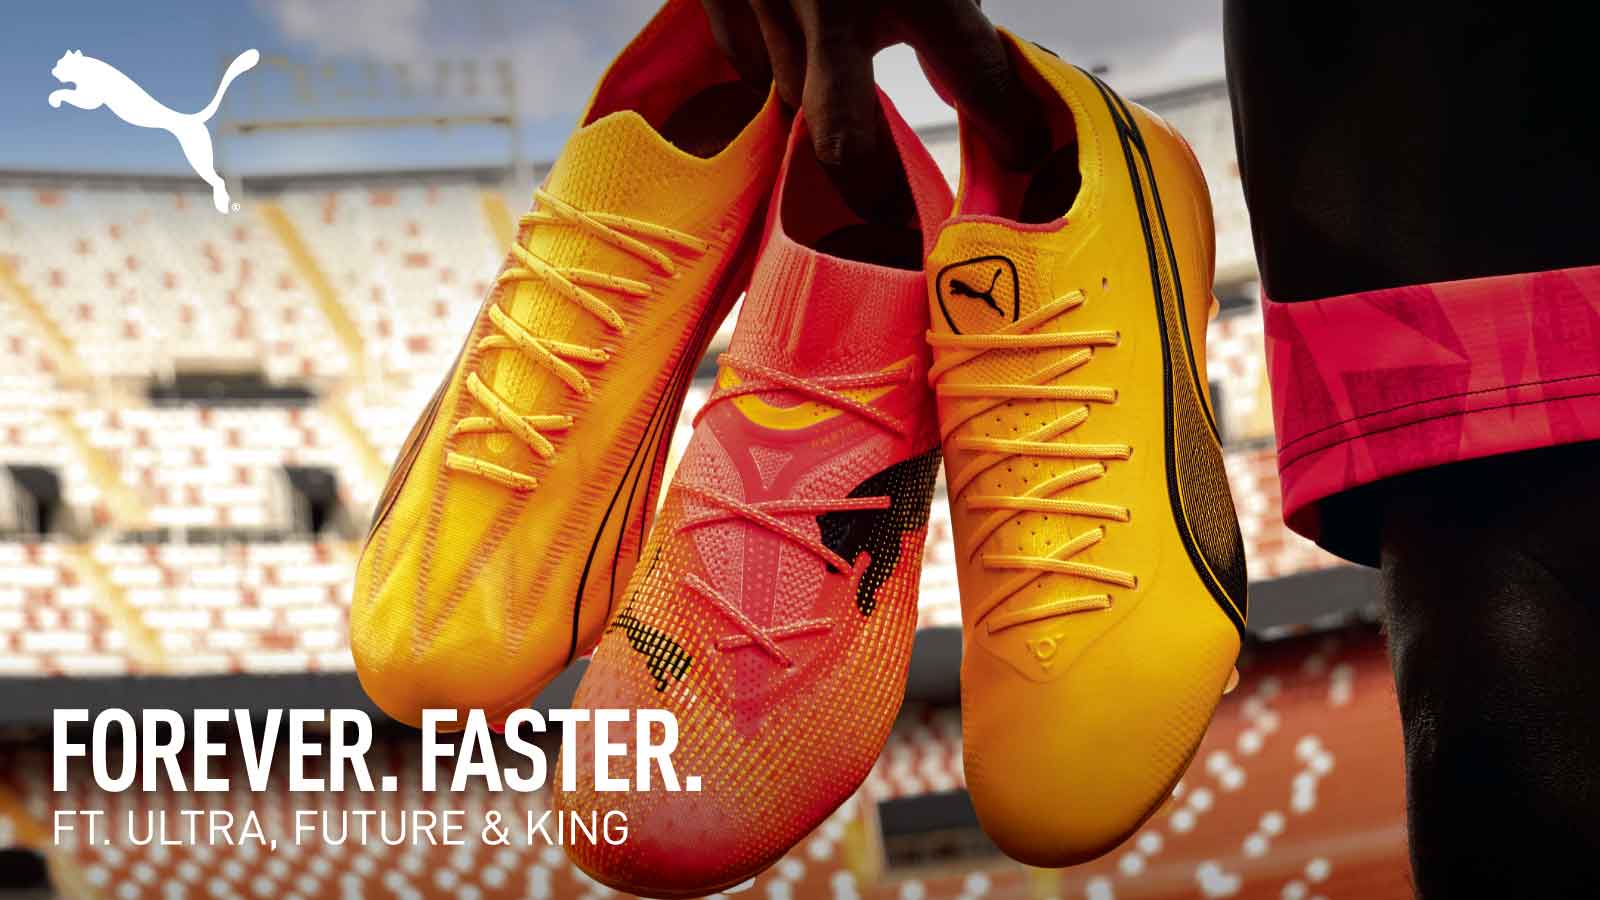 【PUMA(プーマ)】FOREVER.FASTER.